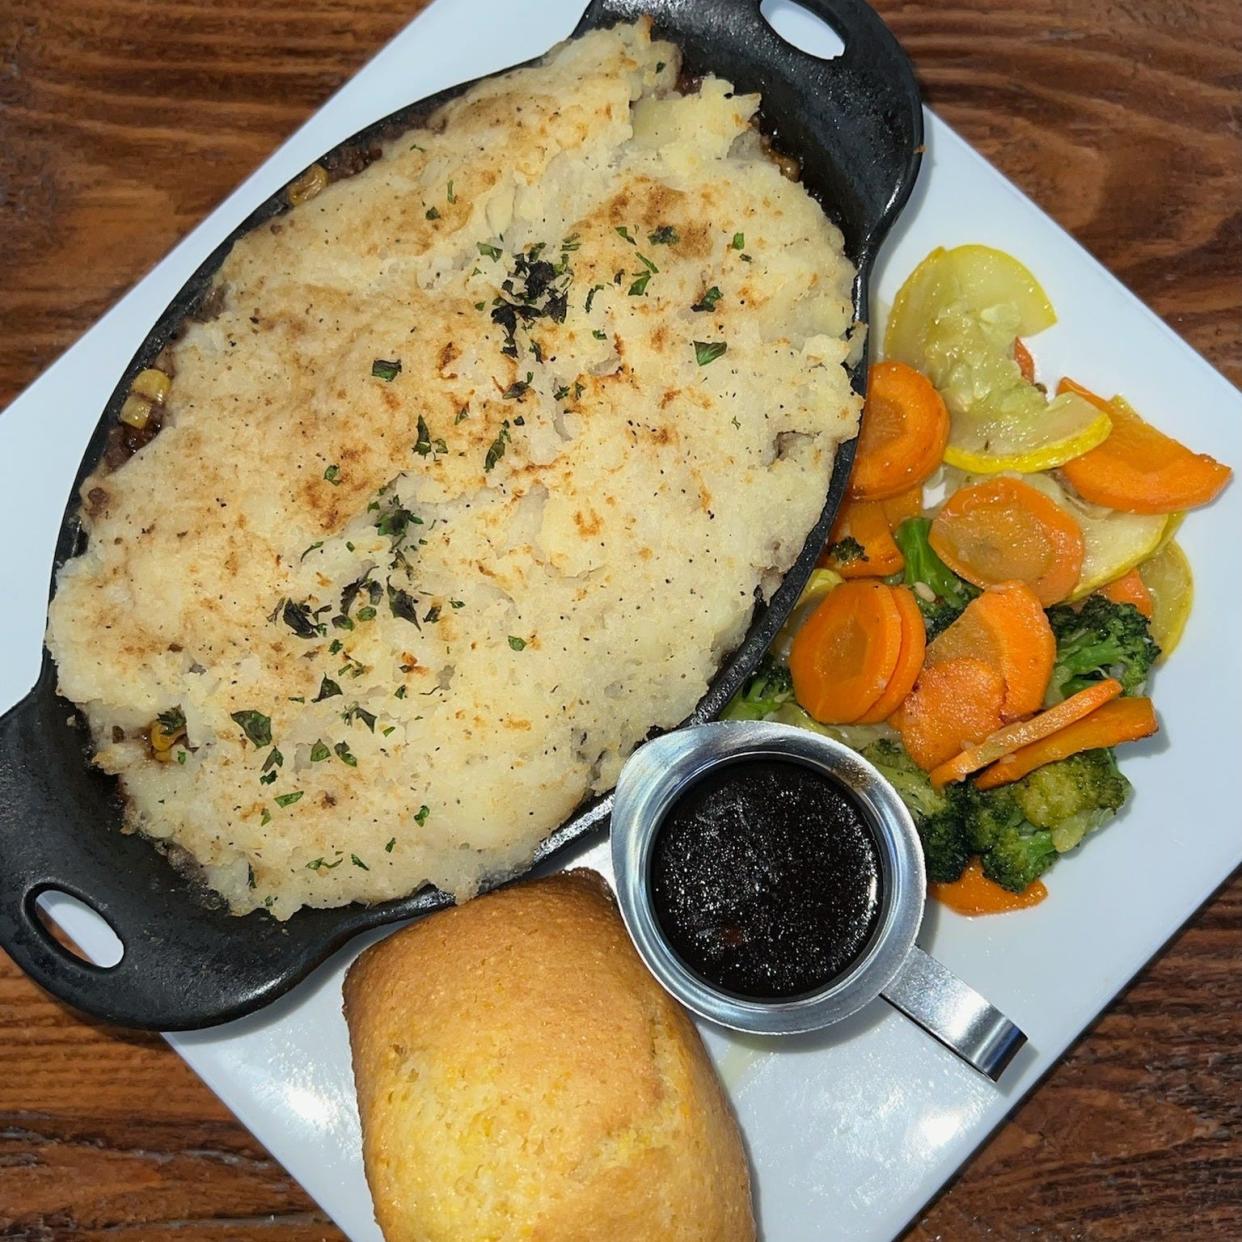 Try the Shepherd's Pie at Pub 6T5.